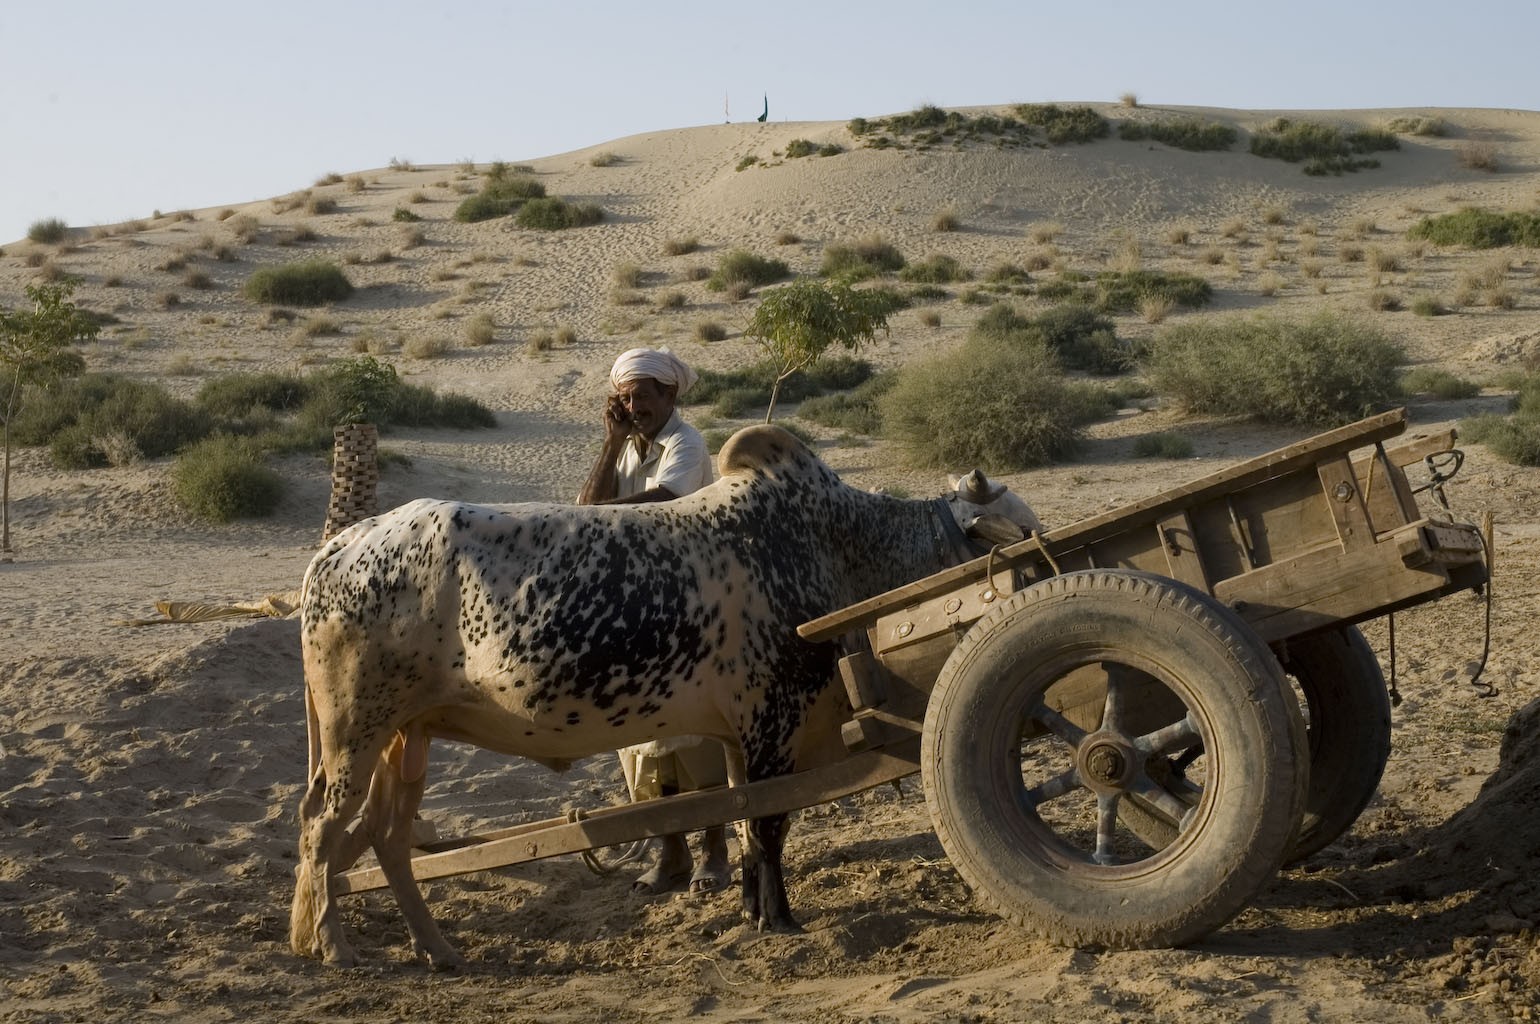 A man with his bull in the desert area